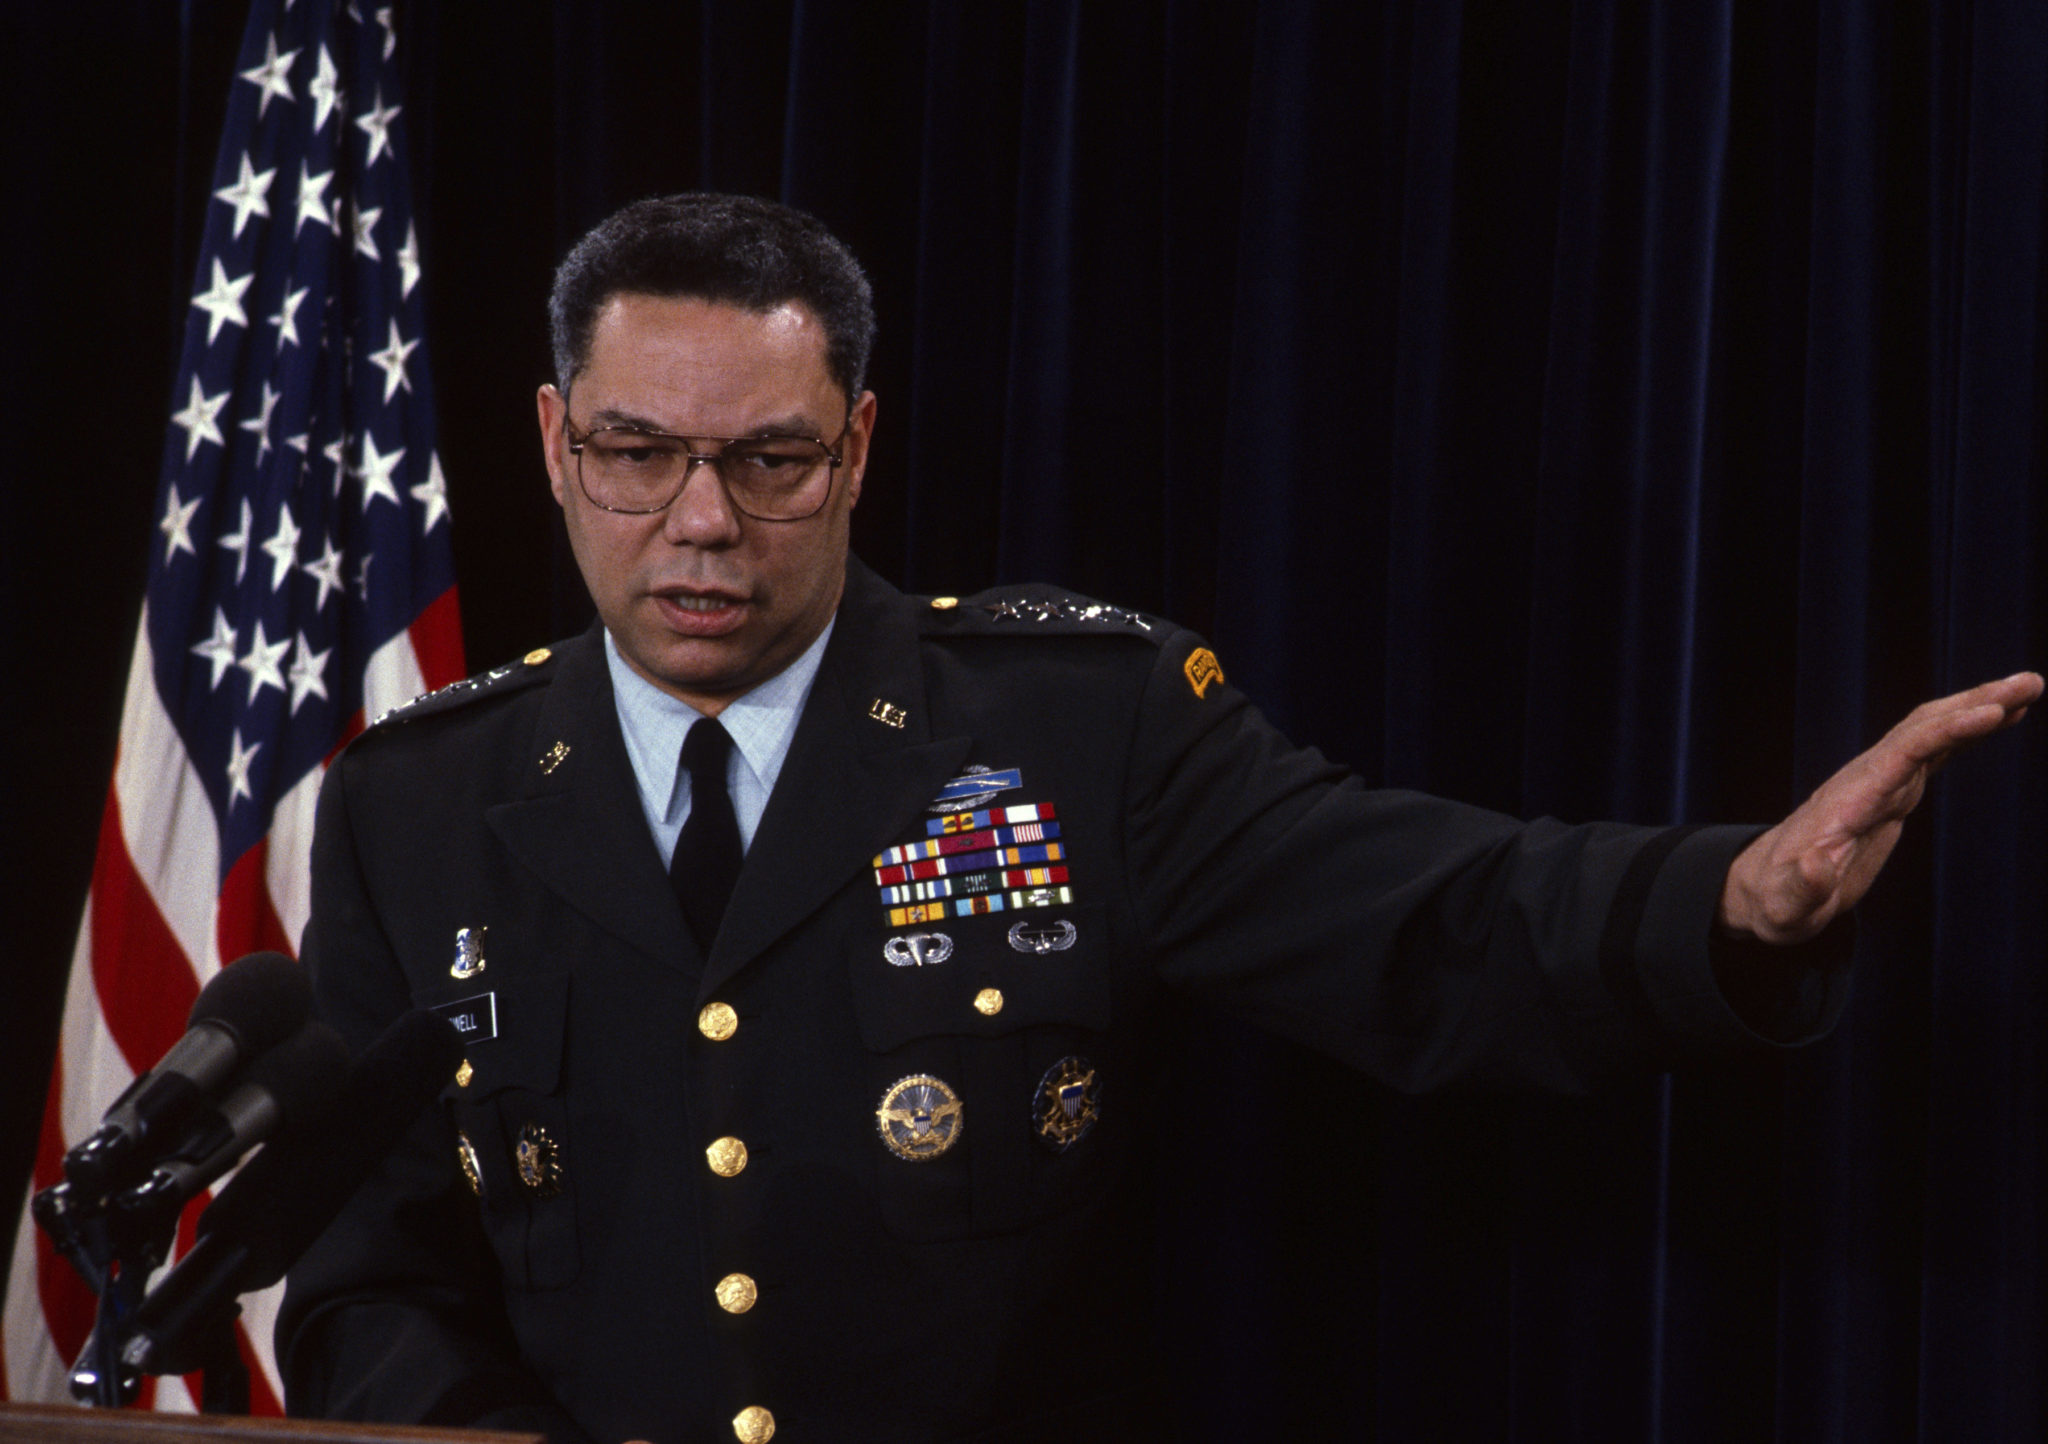 Colin Powell dies from Covid complications - POLITICO